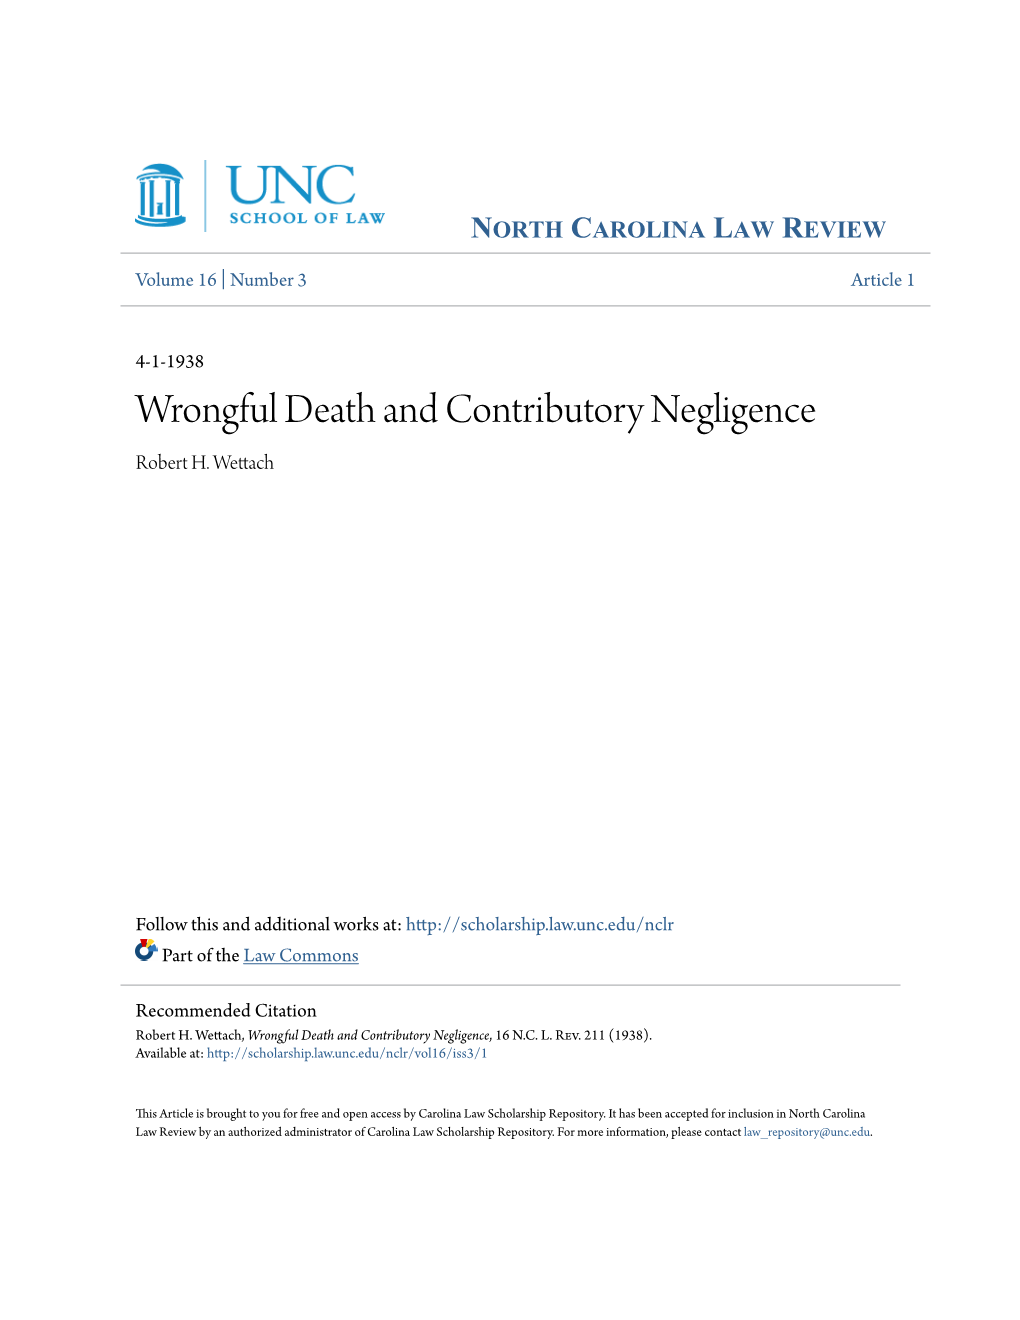 Wrongful Death and Contributory Negligence Robert H